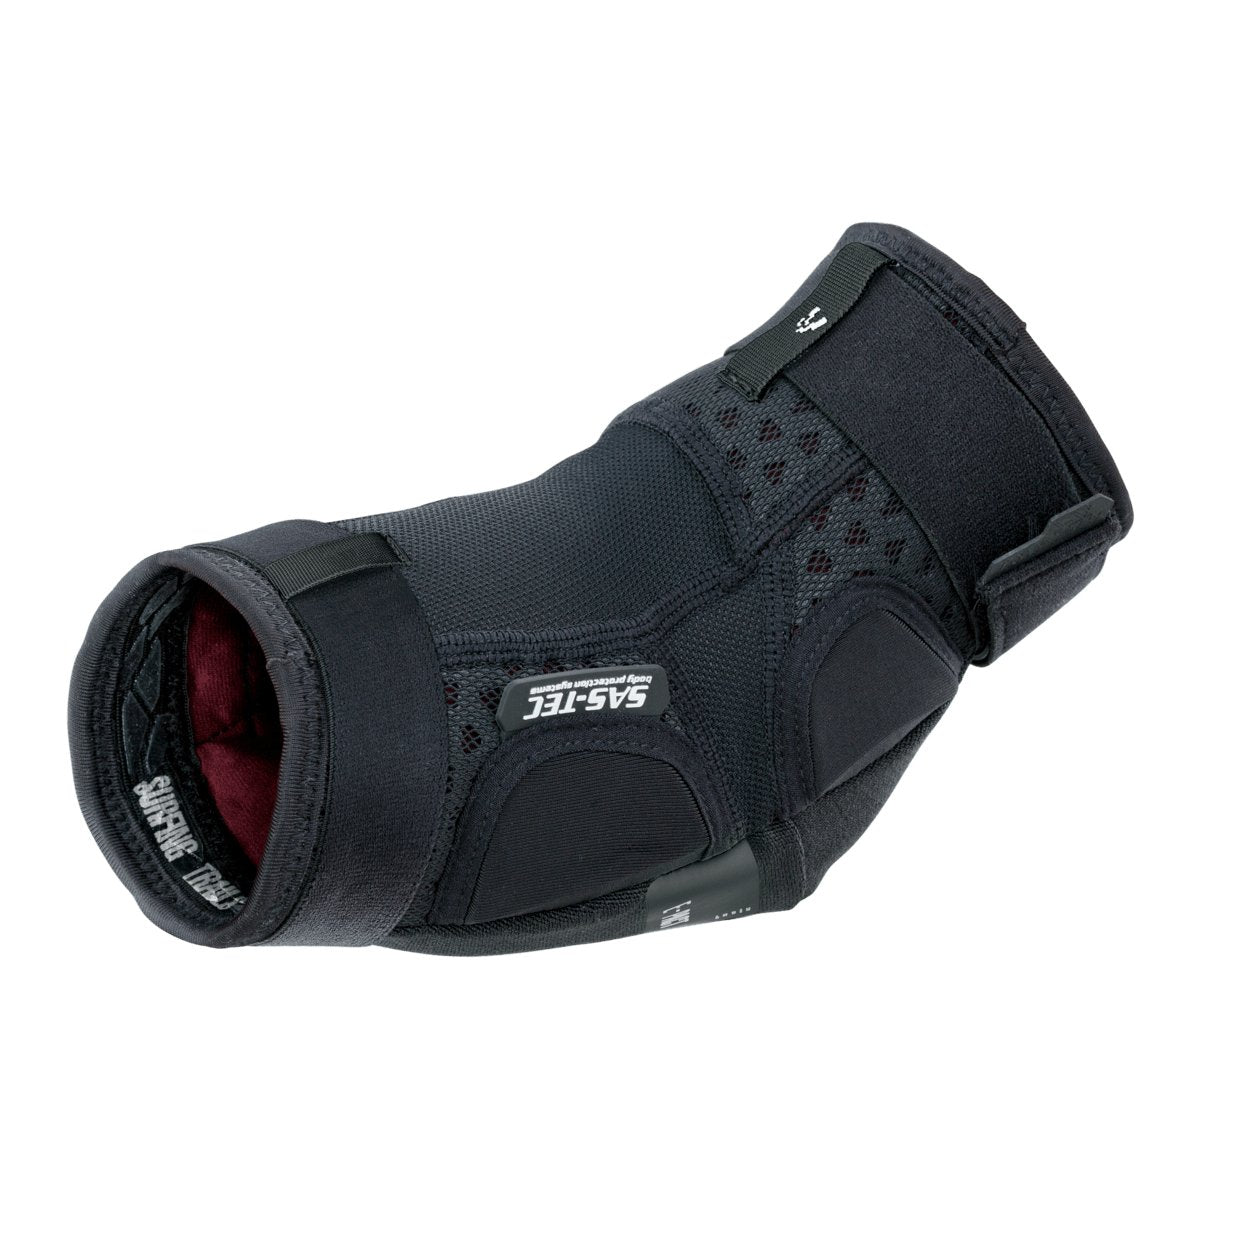 ION Youth MTB Elbow Pads E-Pact 2024 - Worthing Watersports - 9008415981694 - Body Armor - ION Bike